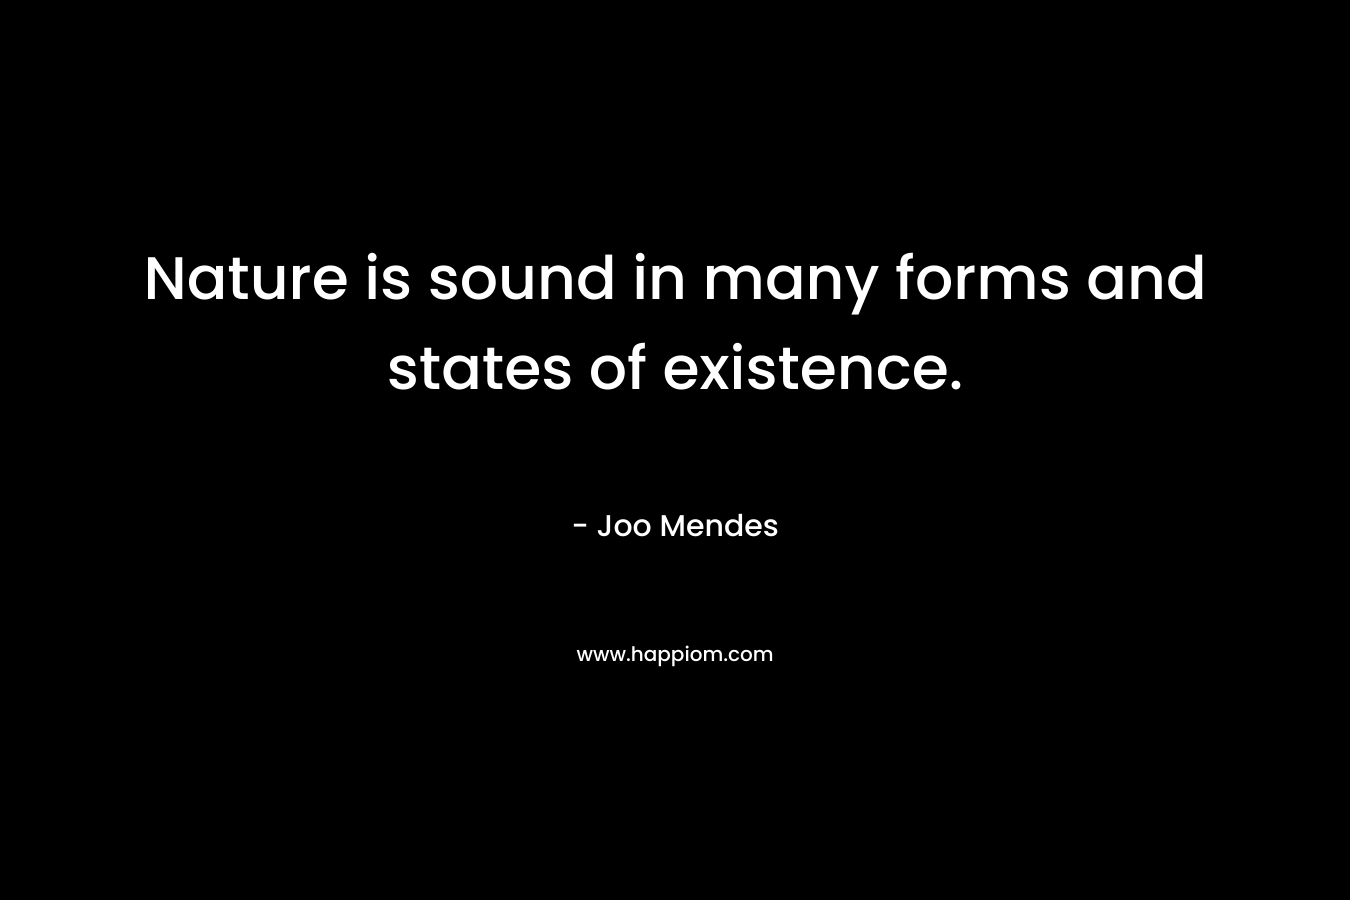 Nature is sound in many forms and states of existence.